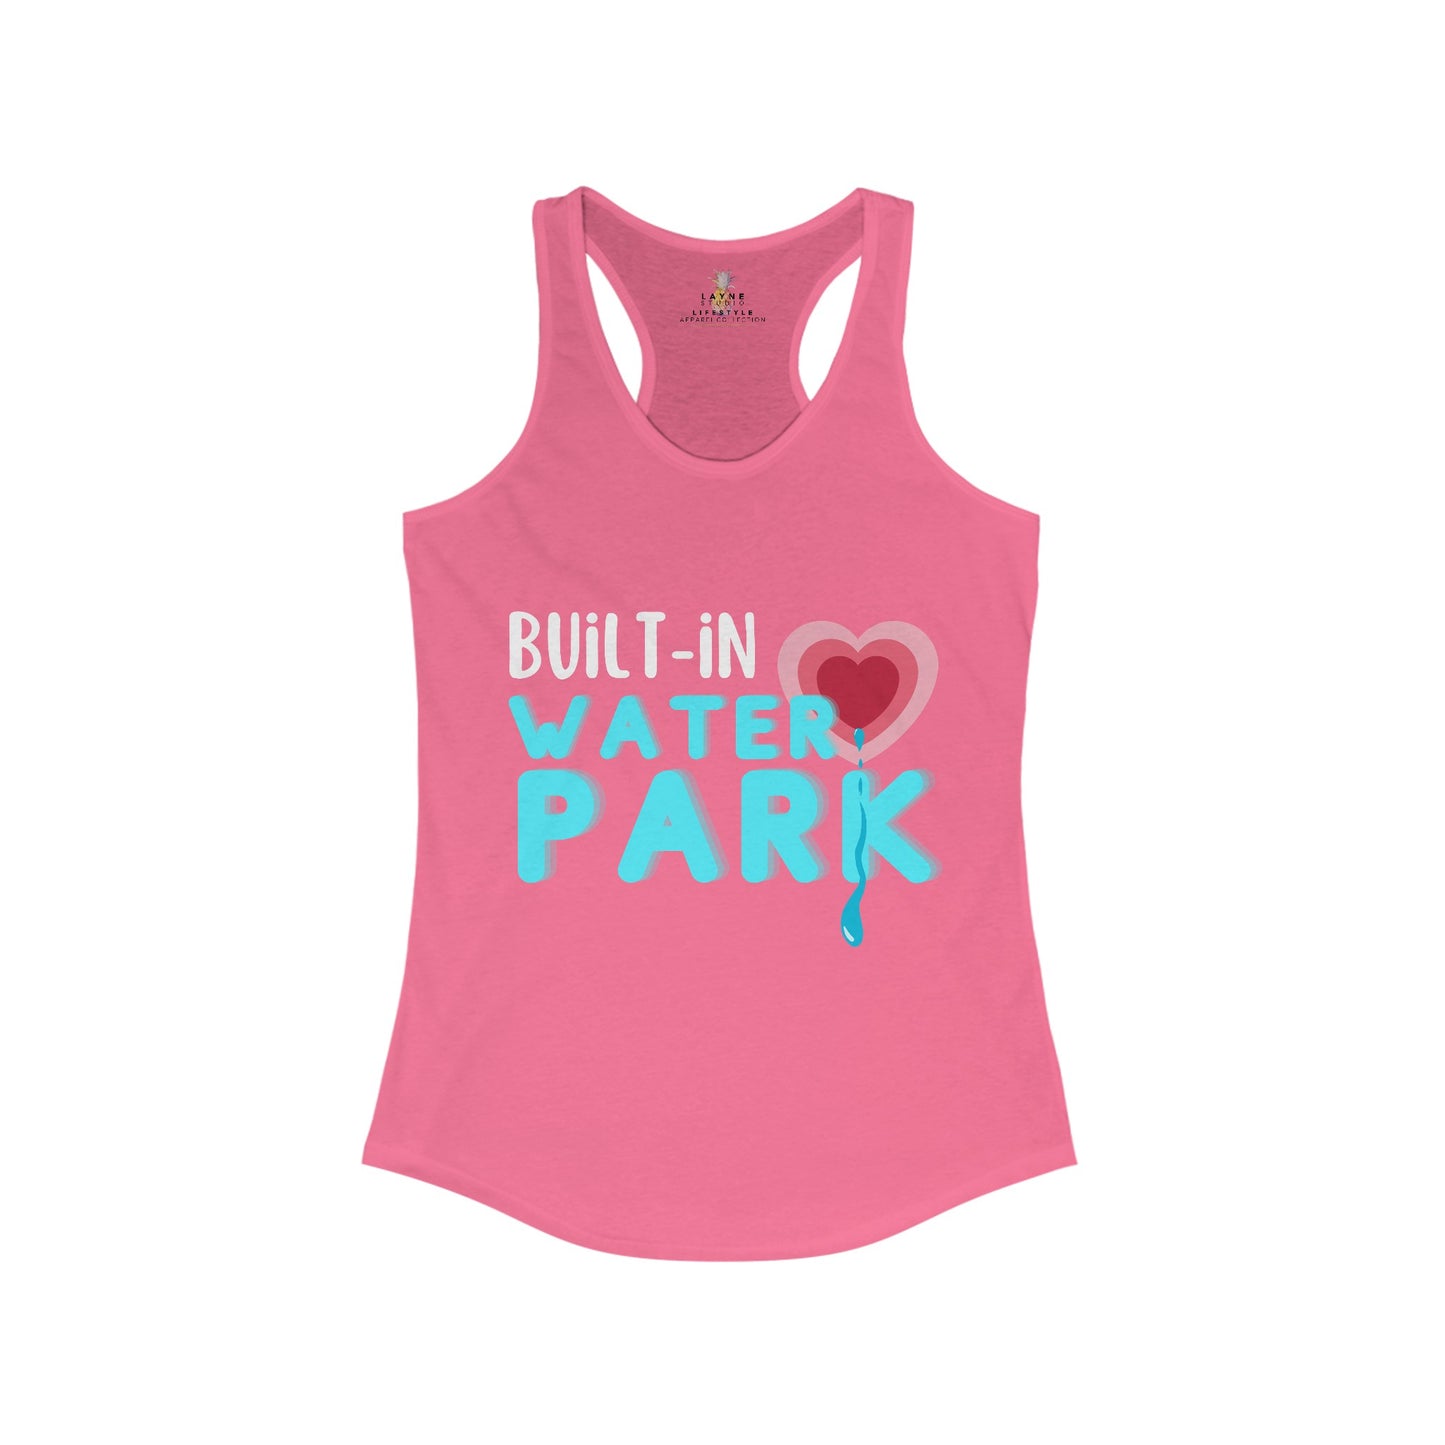 Front View of Layne Studios "Built-In Water Park" Graphic Solid Hot Pink Racerback Tank-Top